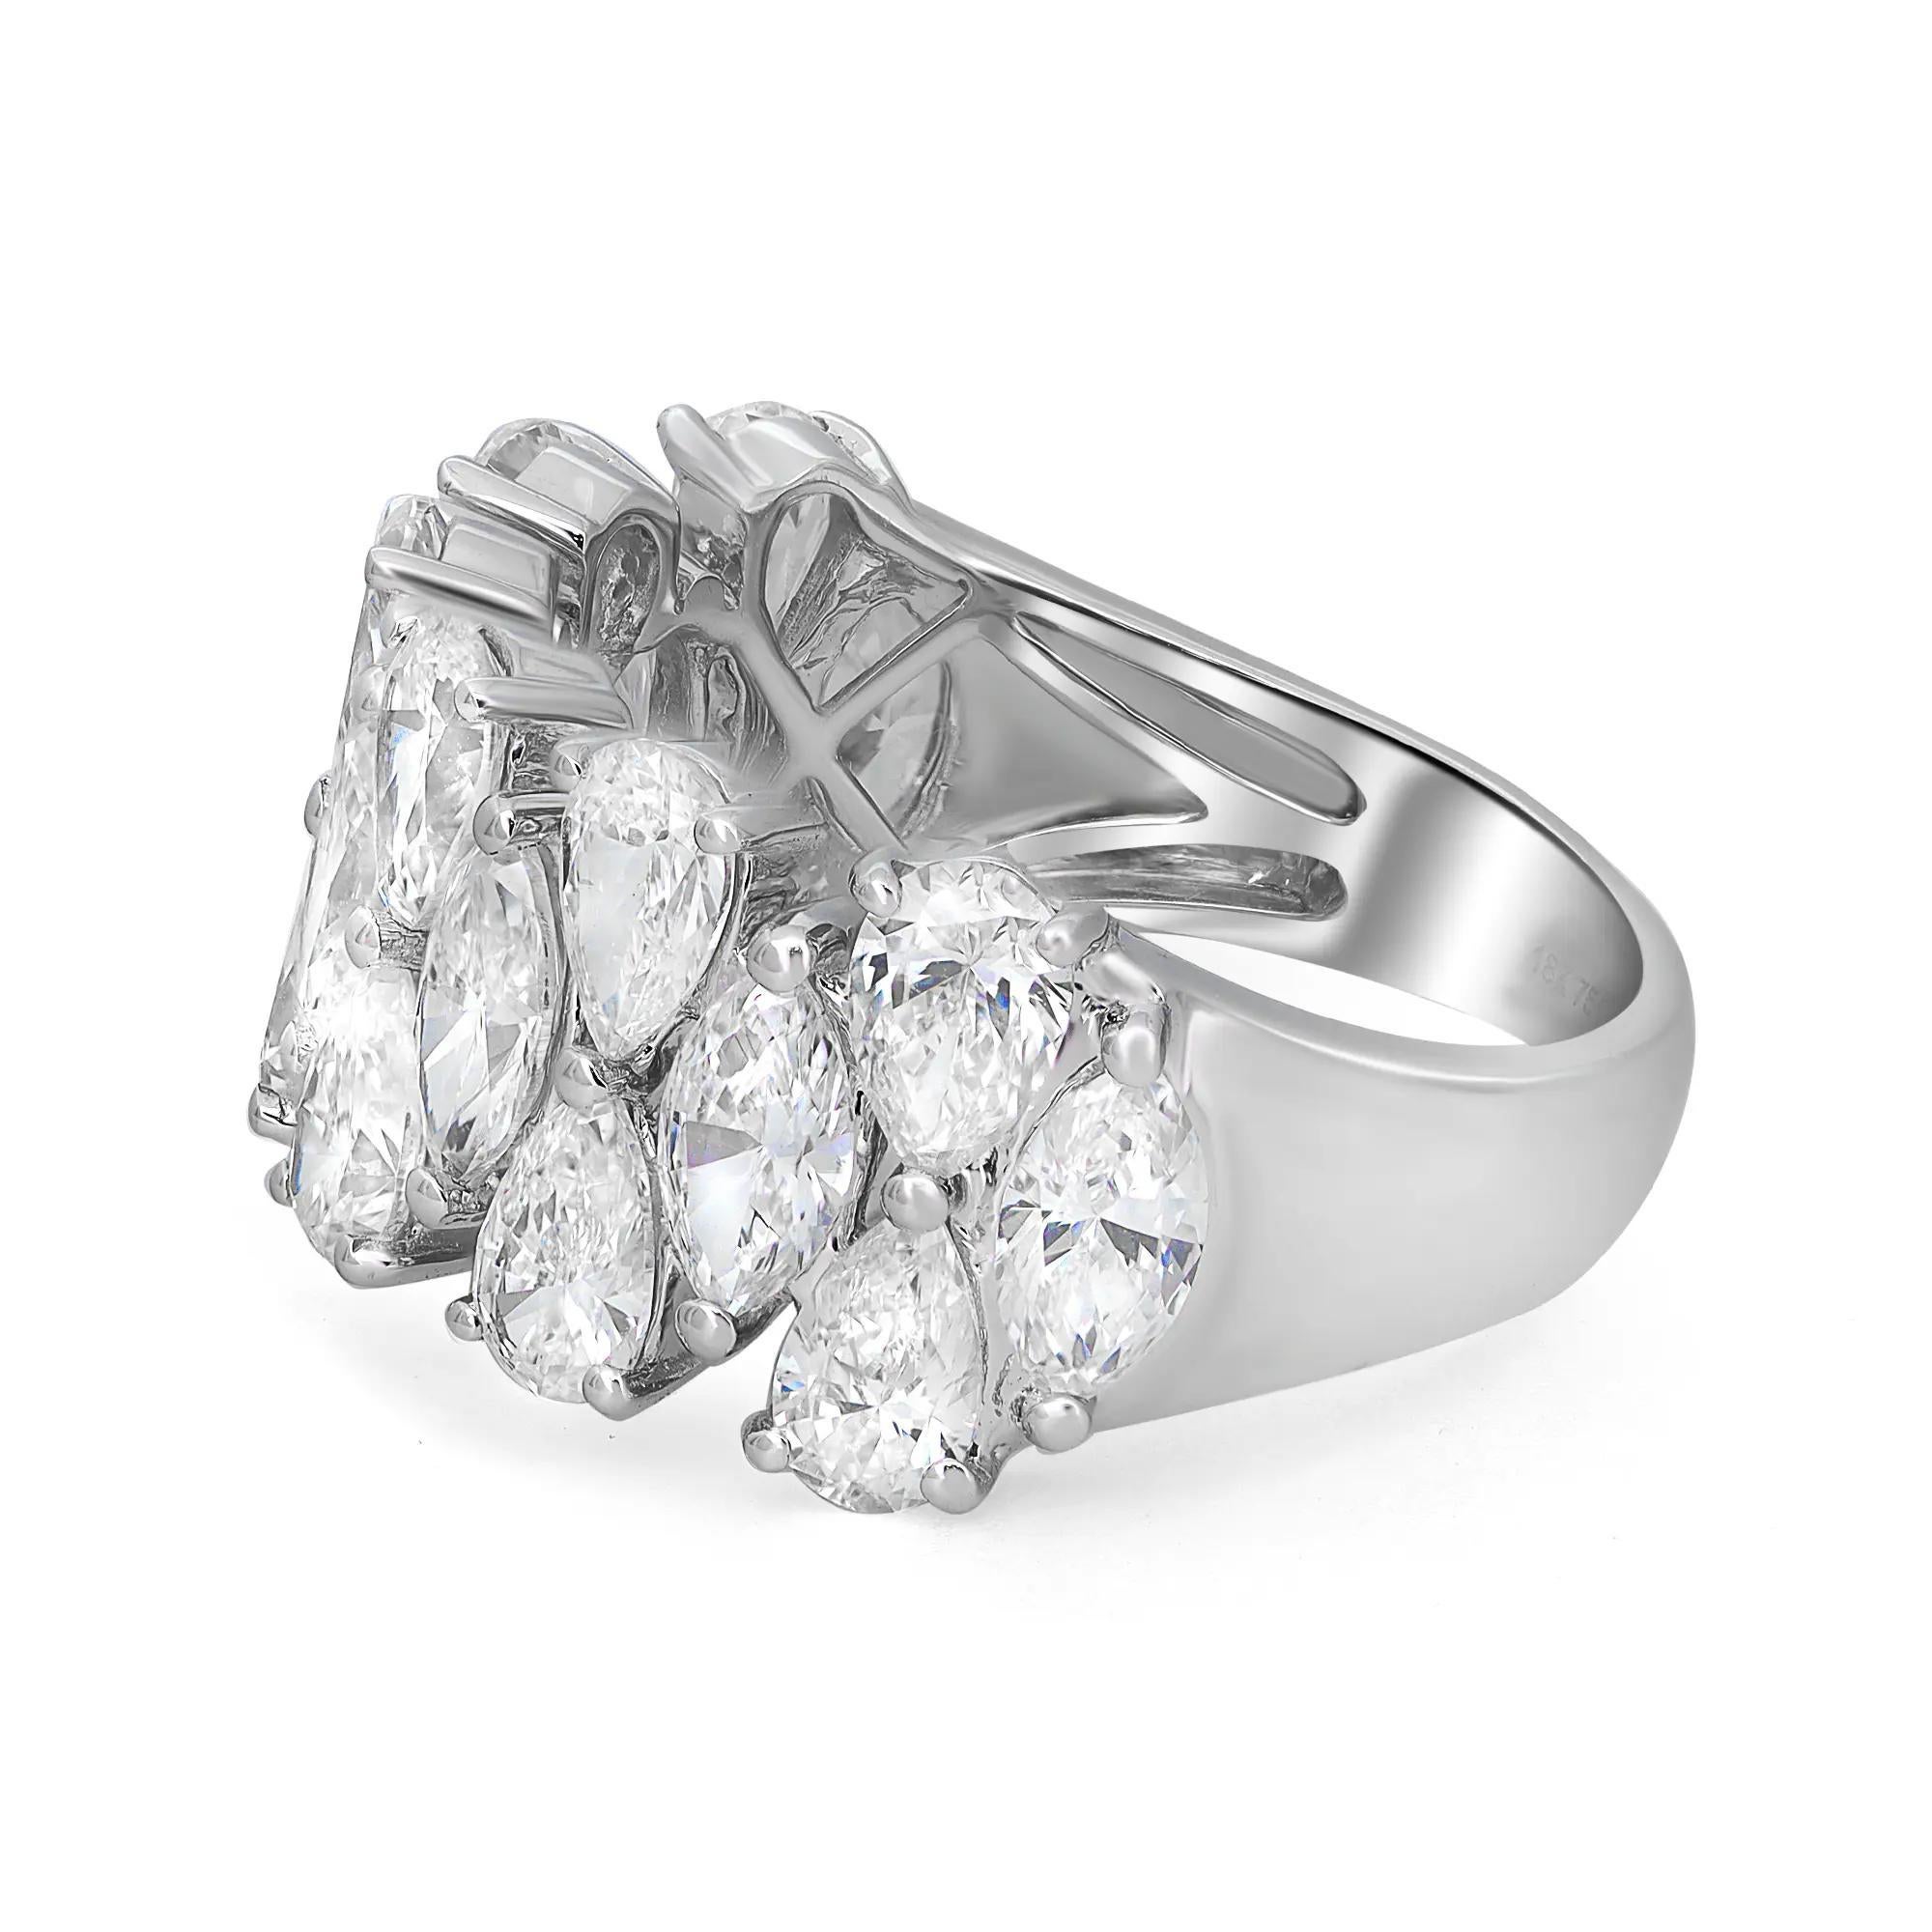 Shimmering and elegant, this statement diamond band ring is crafted in lustrous 18K white gold and features 19 prong set dazzling pear and marquise cut diamonds weighing 3.93 carats. Diamond quality: I-J and clarity VS. Perfect to flaunt with any